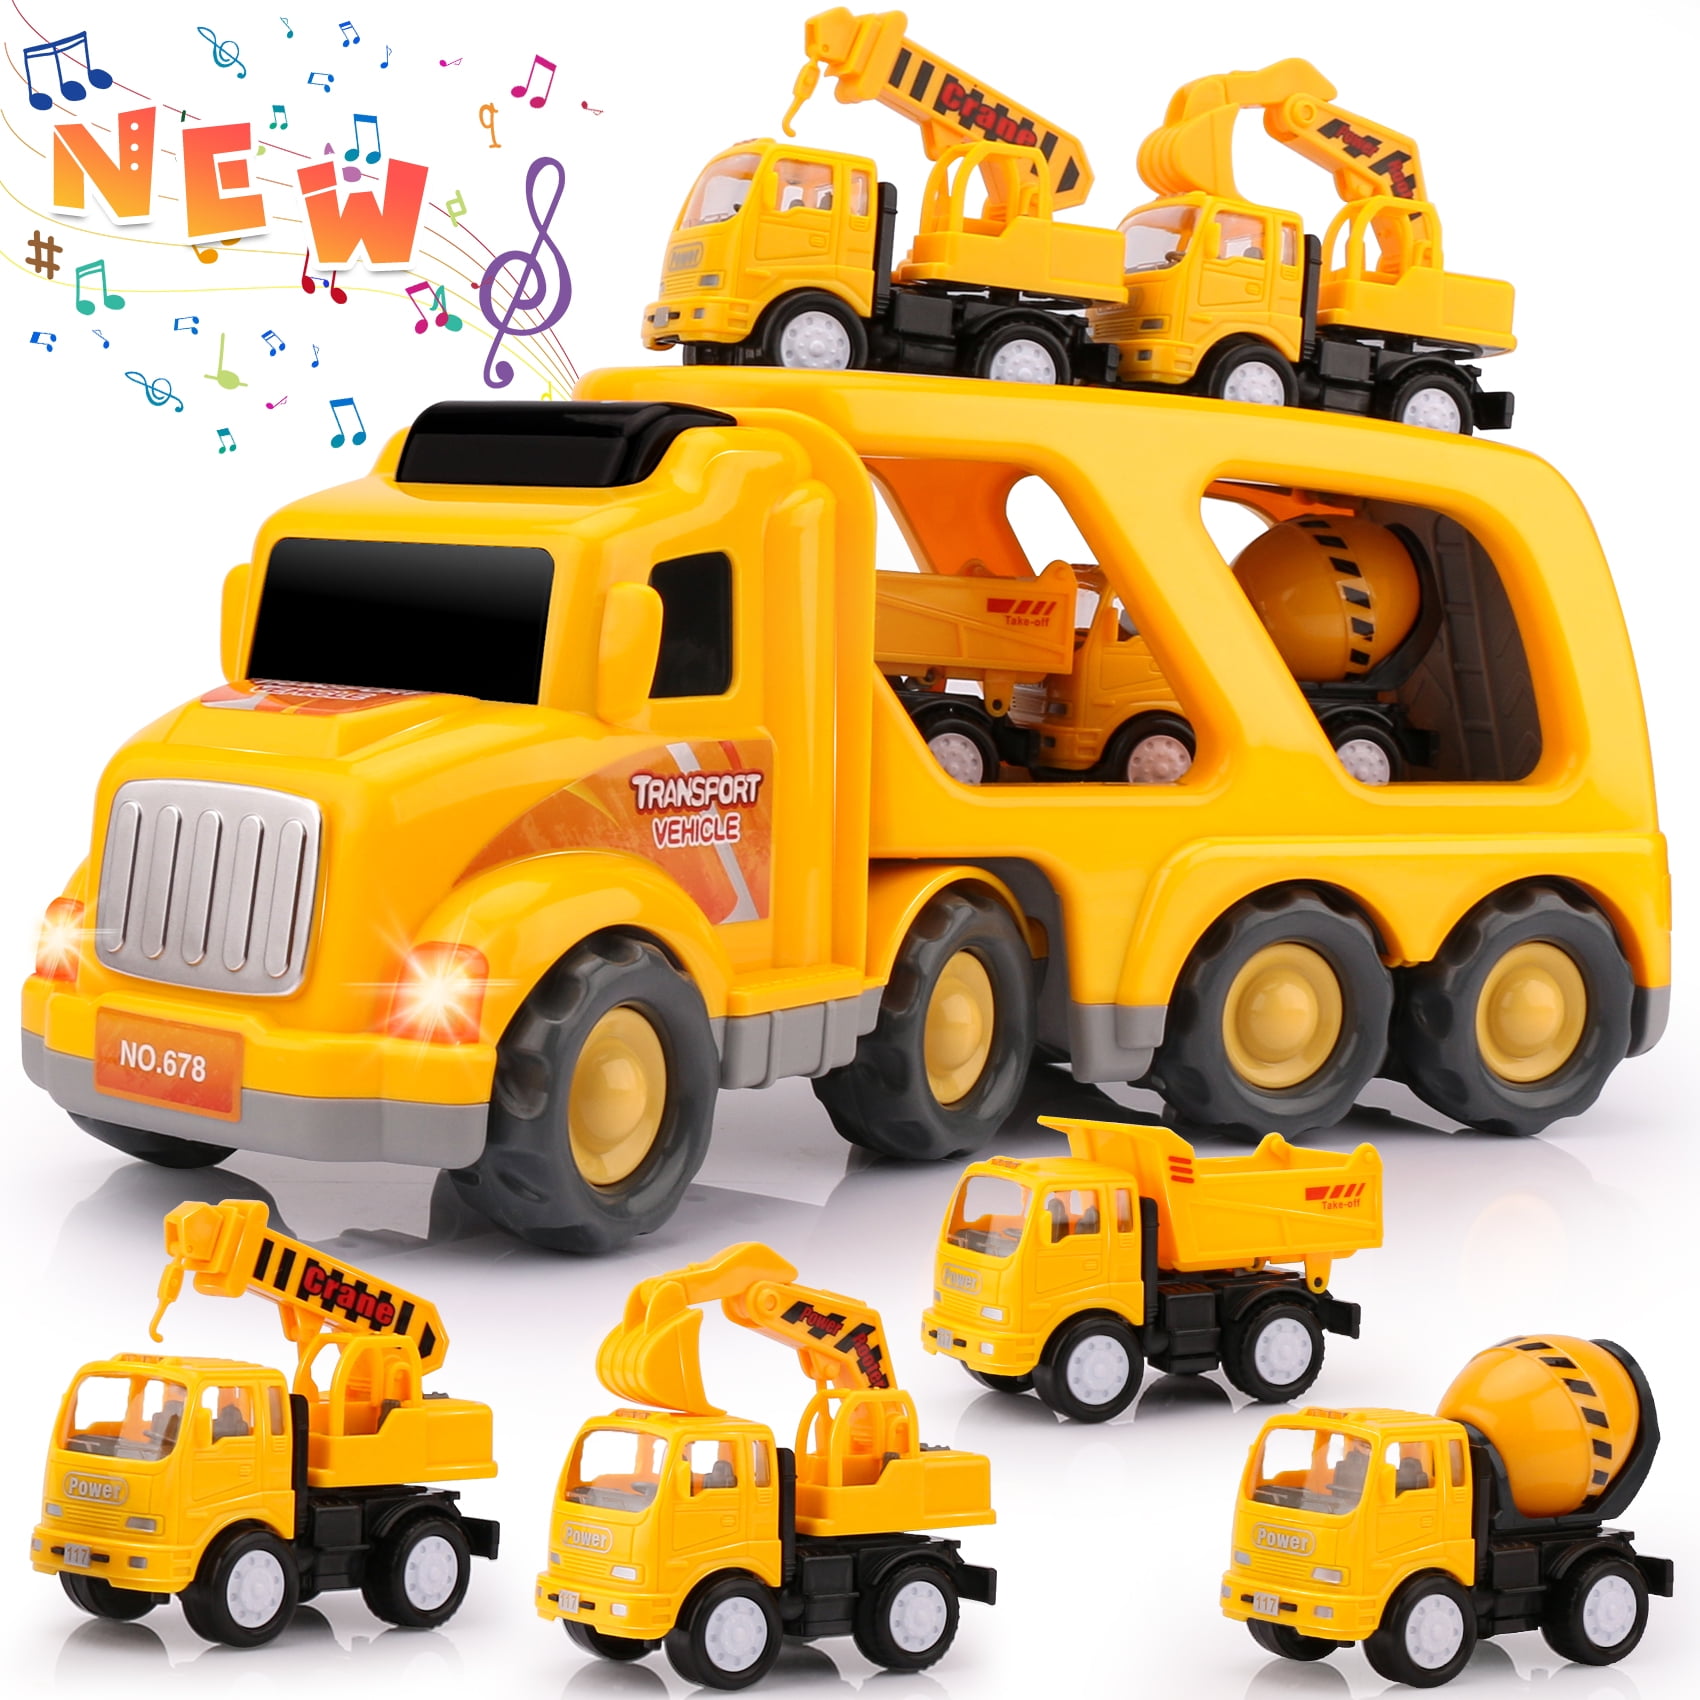 Kids Toys Car for Boys: Boy Toy Trucks for 3 4 5 6 Year Old Boys Girls |  Toddler Toys 5 in 1 Carrier Vehicle Construction Toys for Kids Age 3-5 4-5